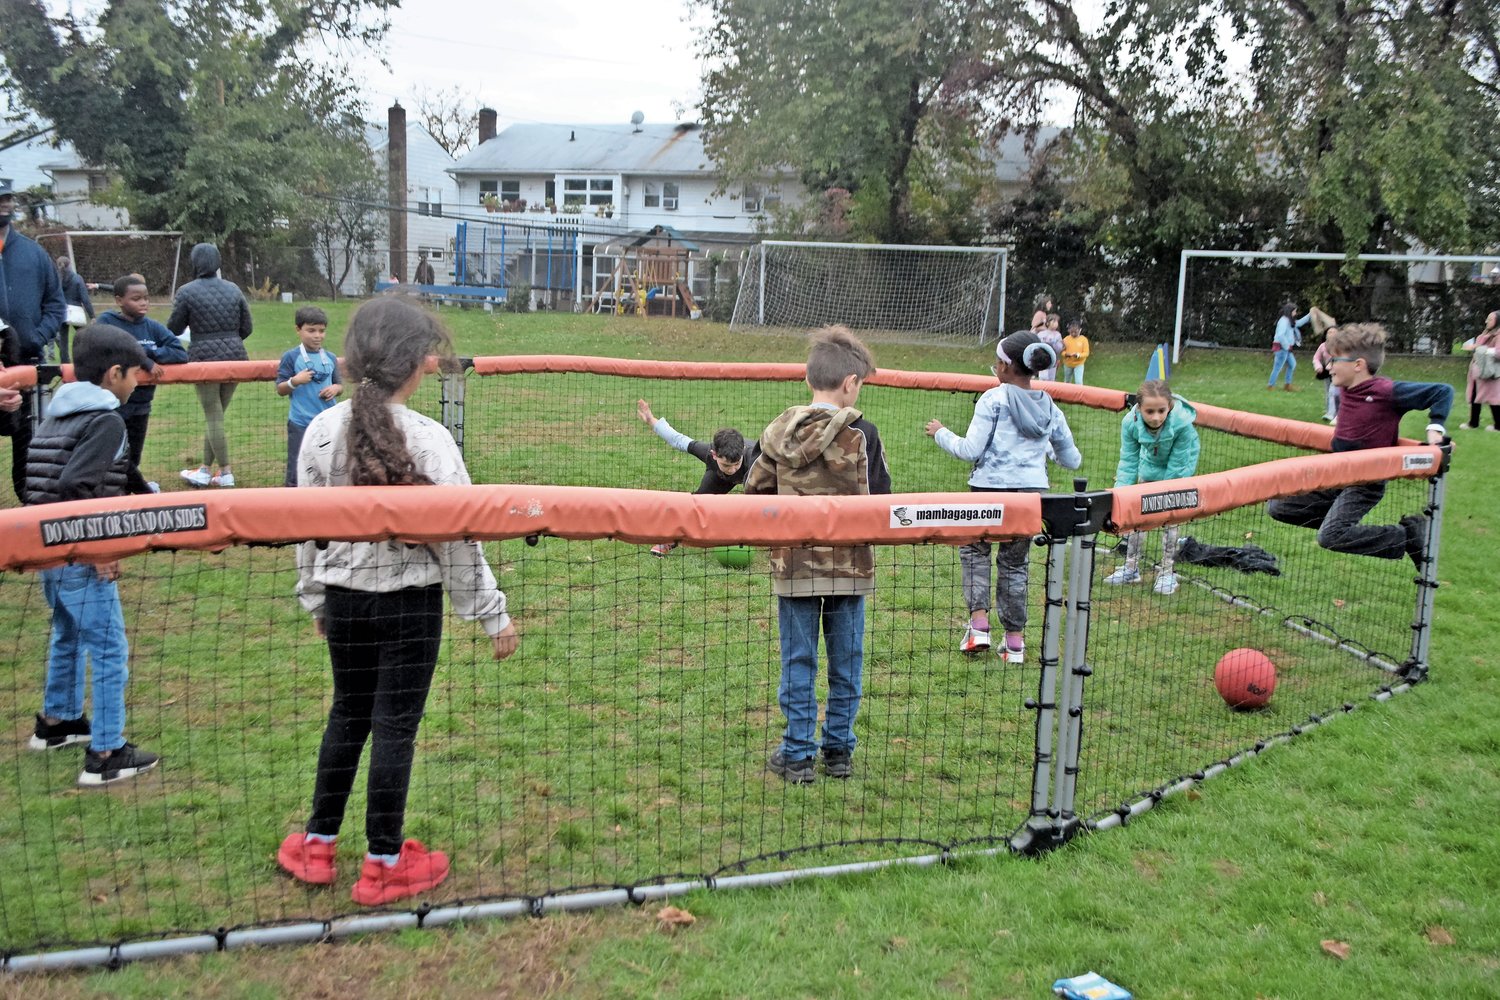 Ogden Elementary School students played the dodgeball variant game of gaga at Fall Y’all on Oct. 28.